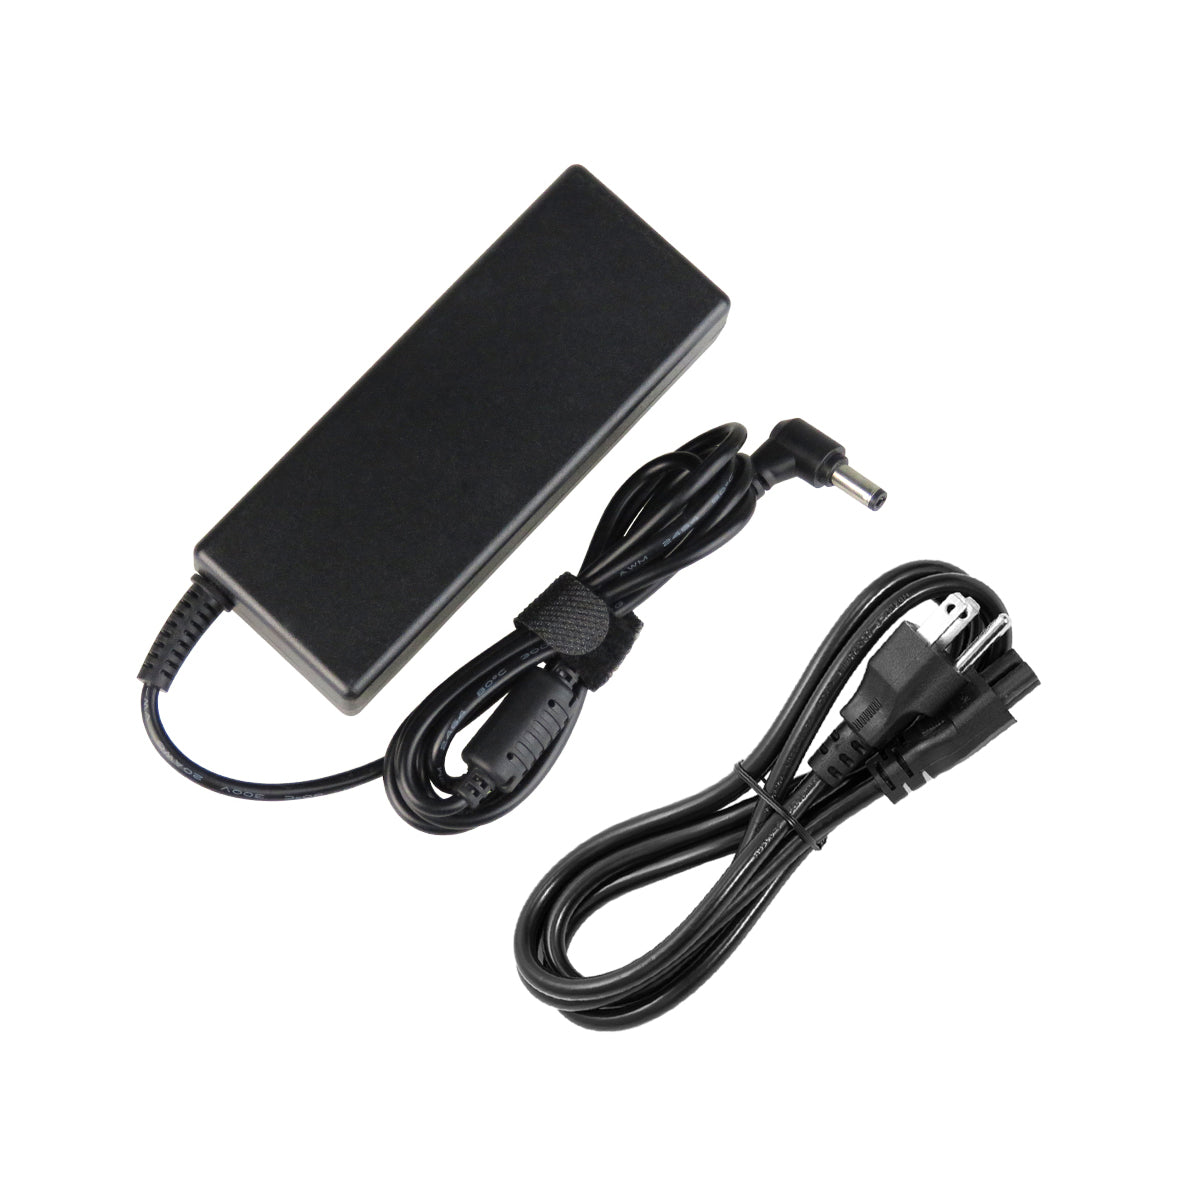 AC Adapter Charger for ASUS X55C-XH31 Notebook.